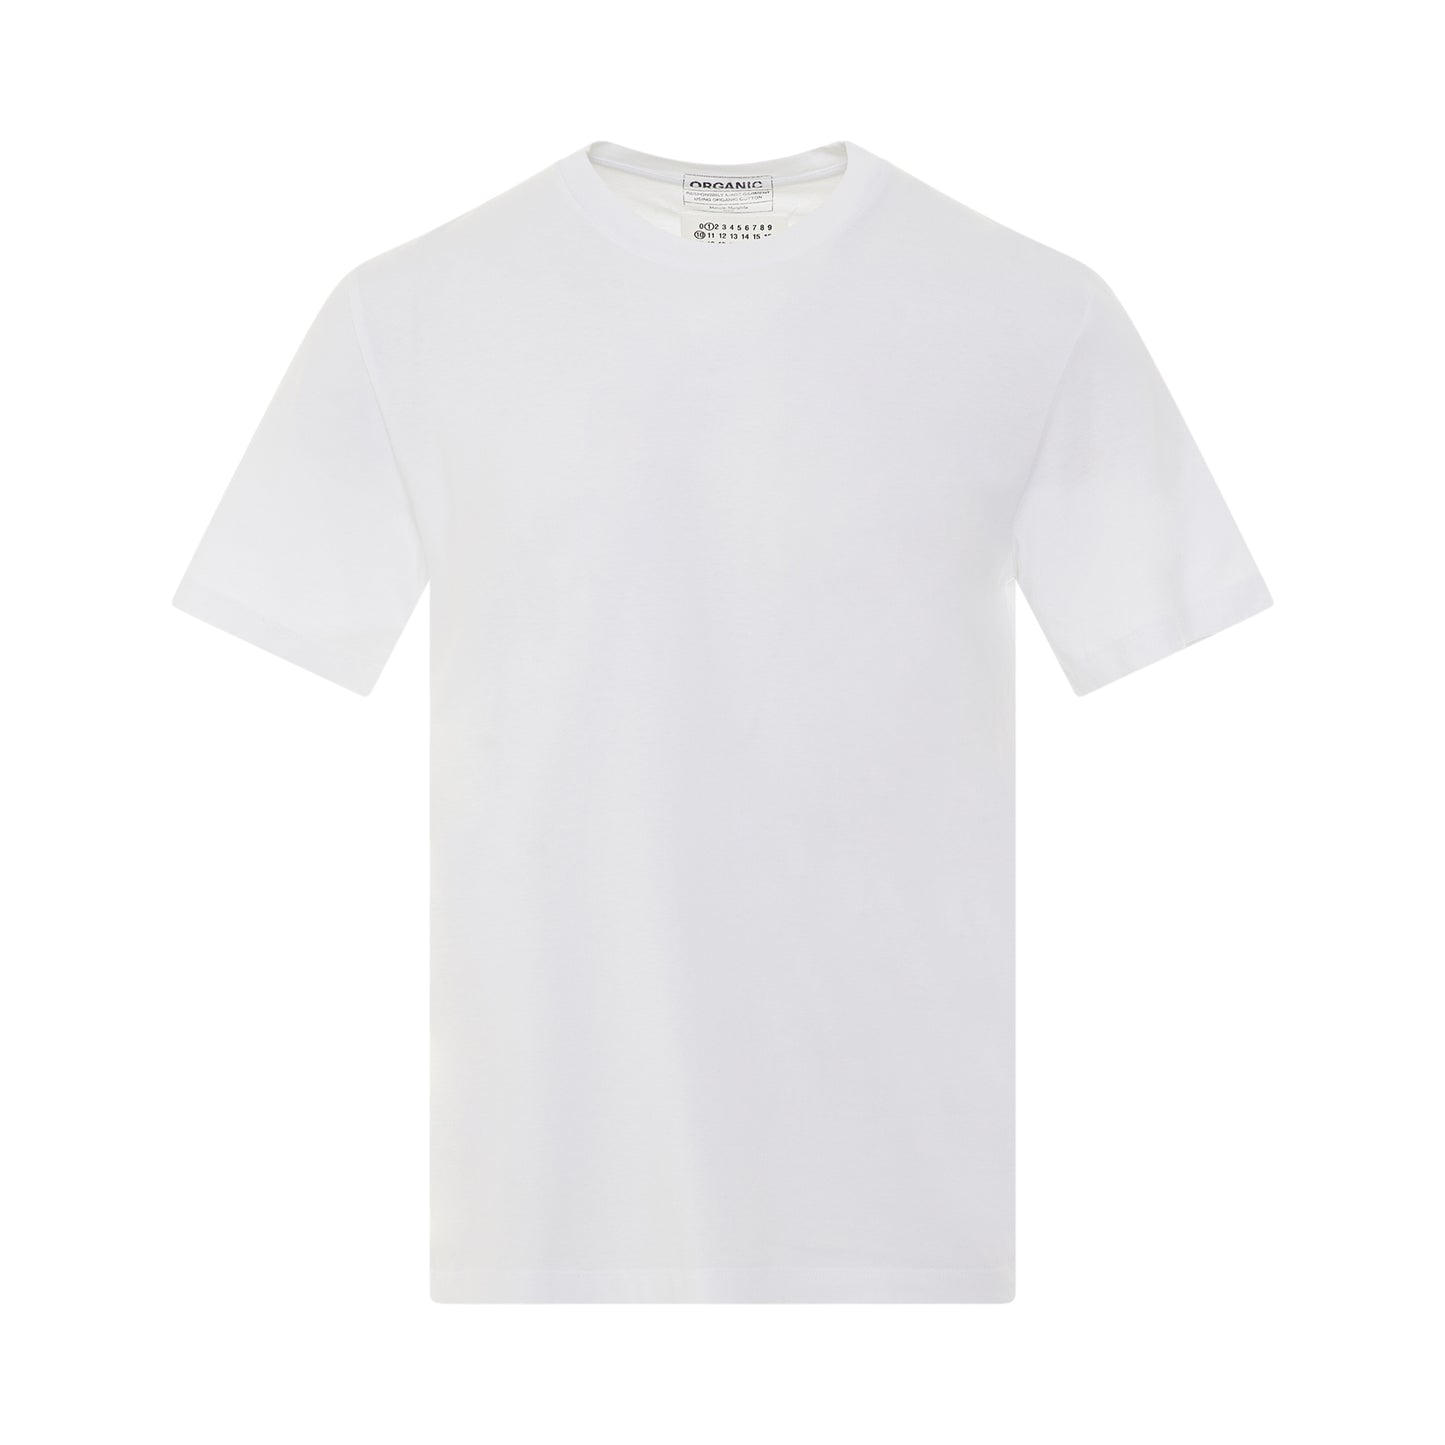 Tri-Pack T-Shirt in Shades of White